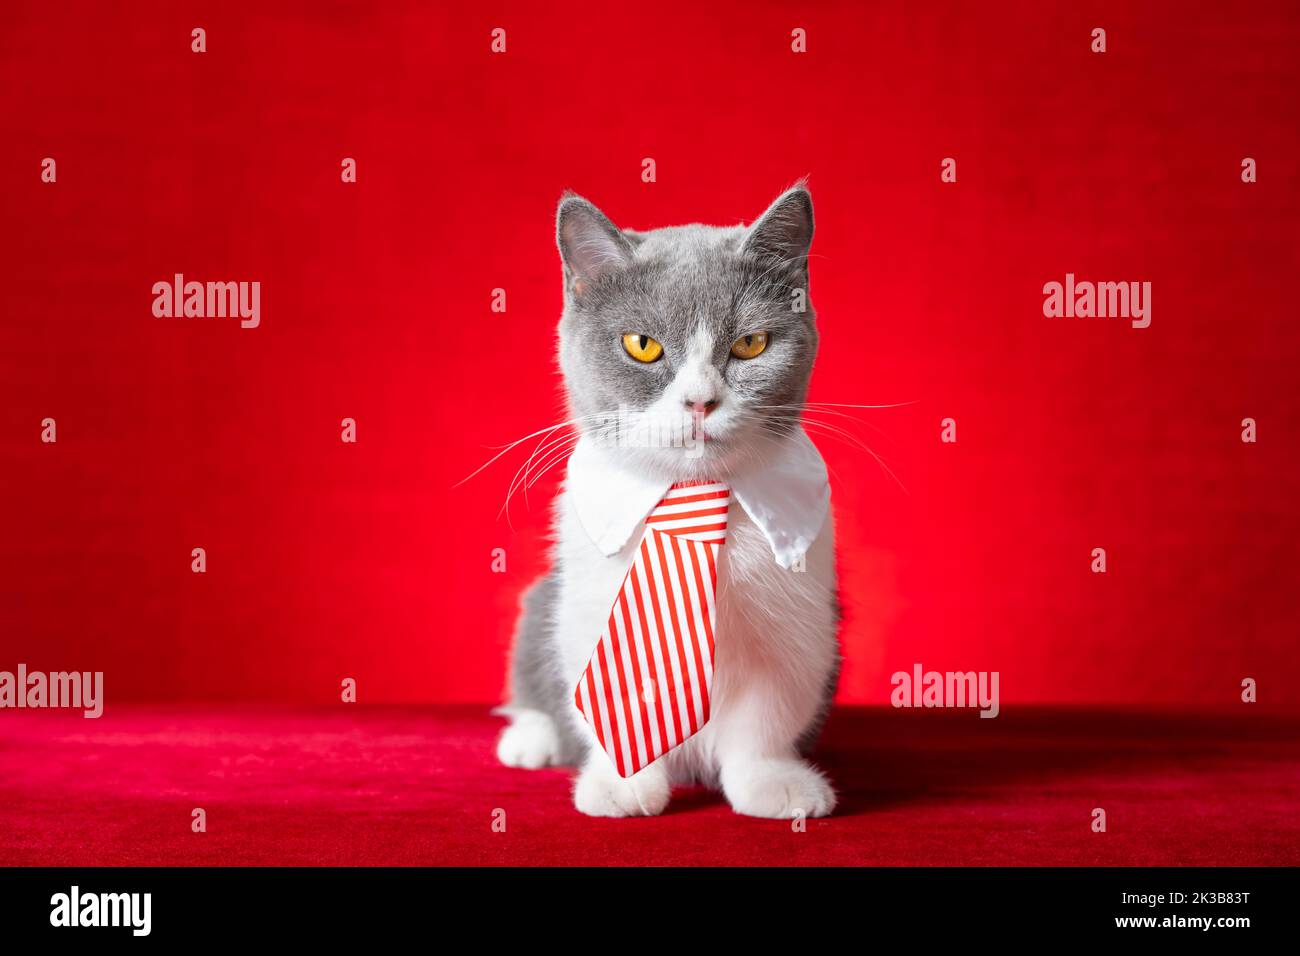 cute british shorthair cat with business tie Stock Photo